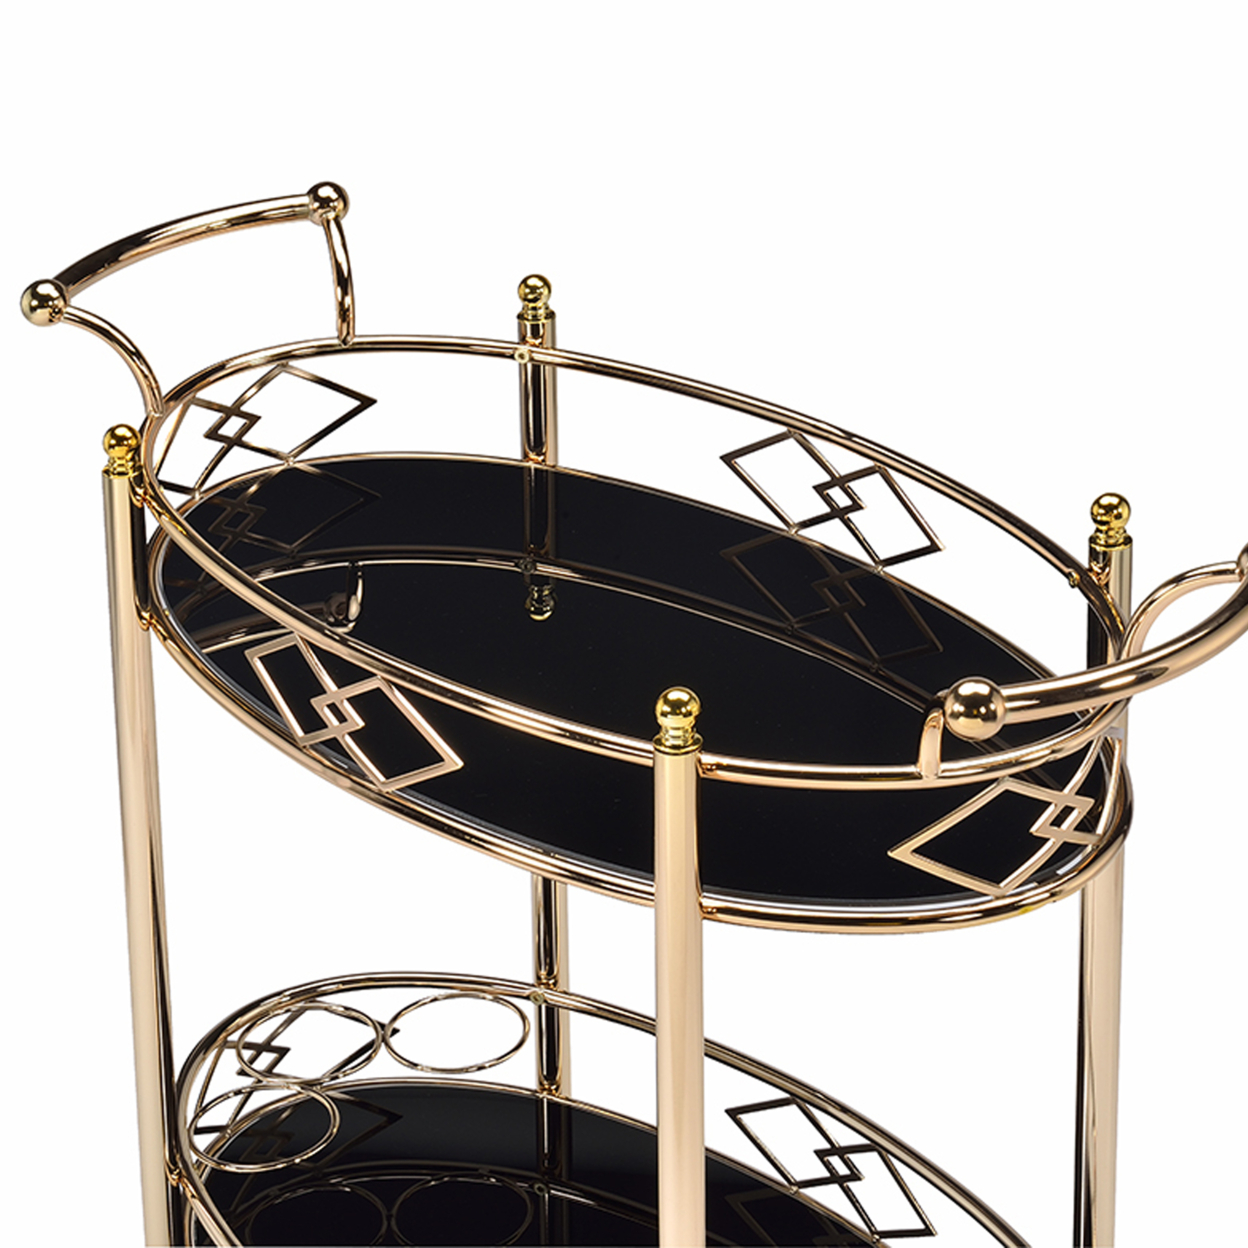 Metal Framed Serving Cart With Tempered Glass Top And Open Bottom Shelf, Gold And Black- Saltoro Sherpi